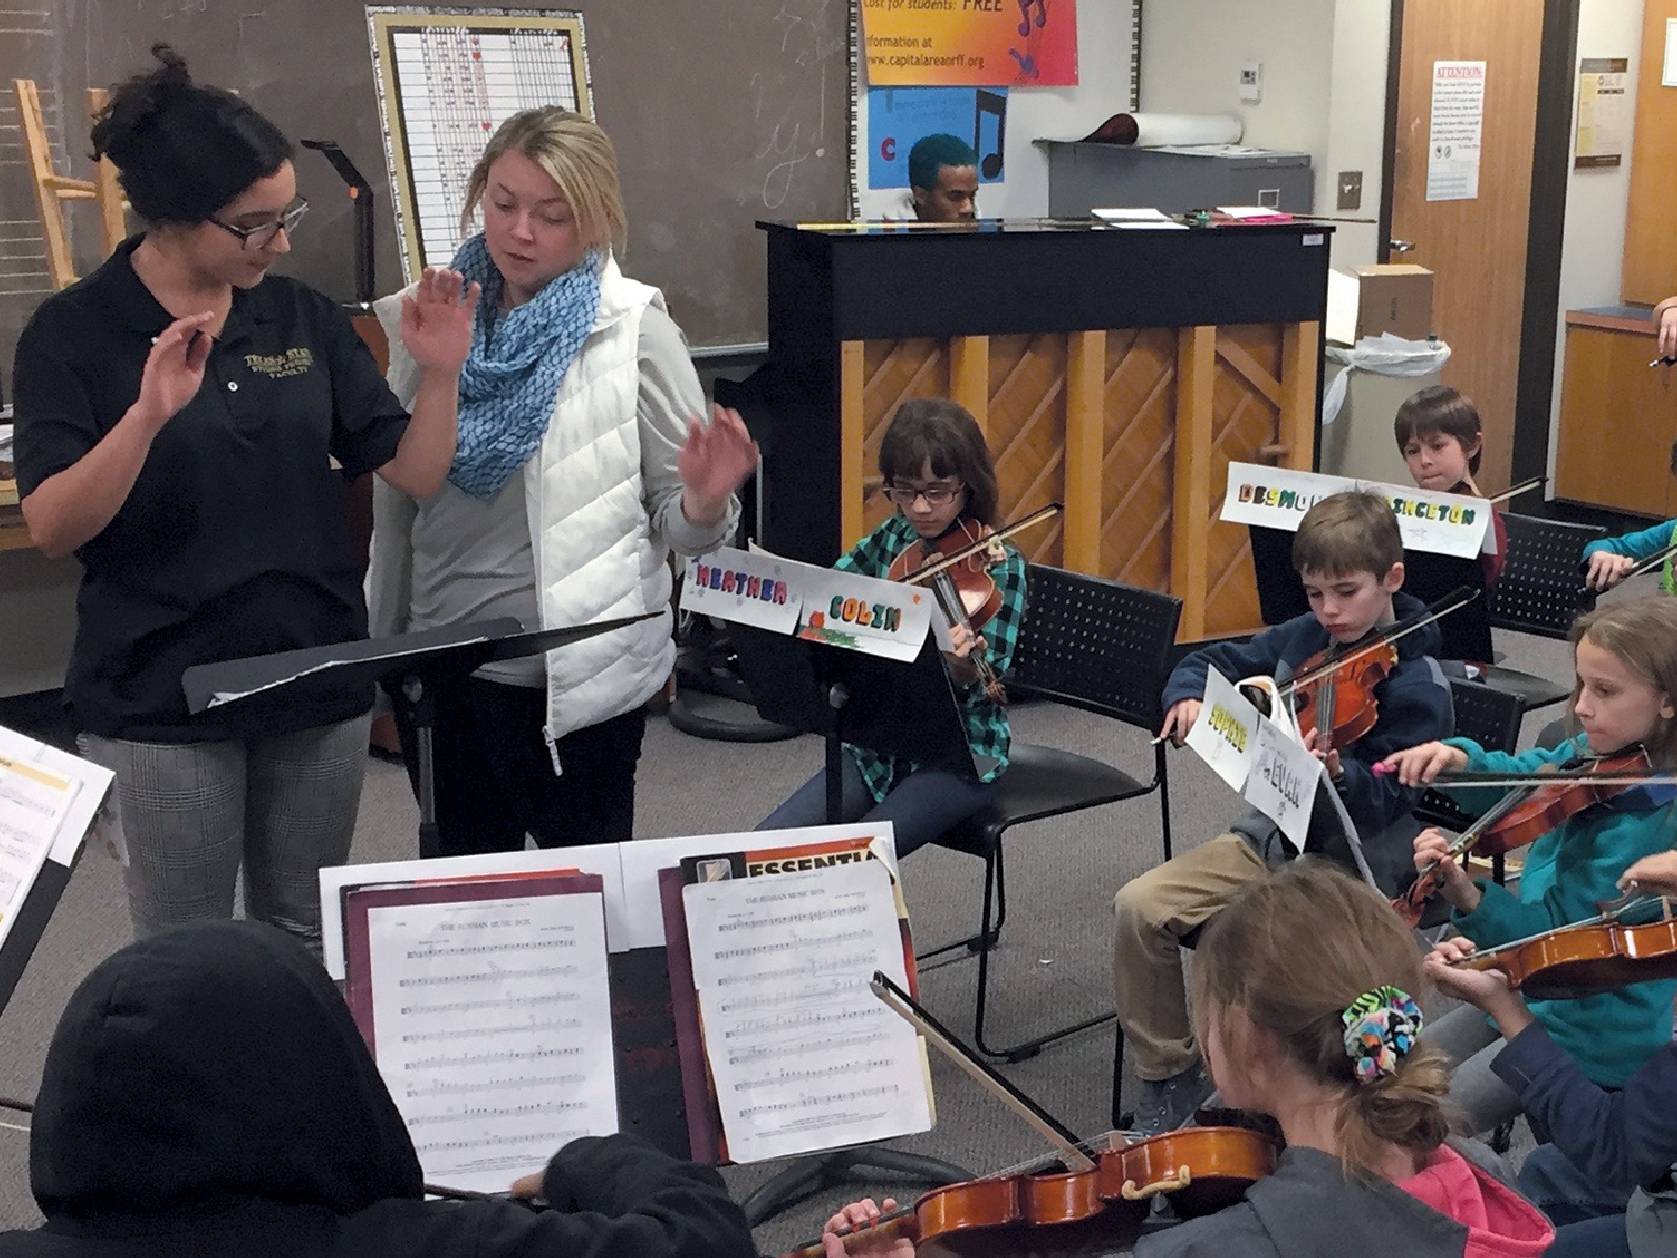 A female string teacher assists a student conductor in directing a youth string ensemble.